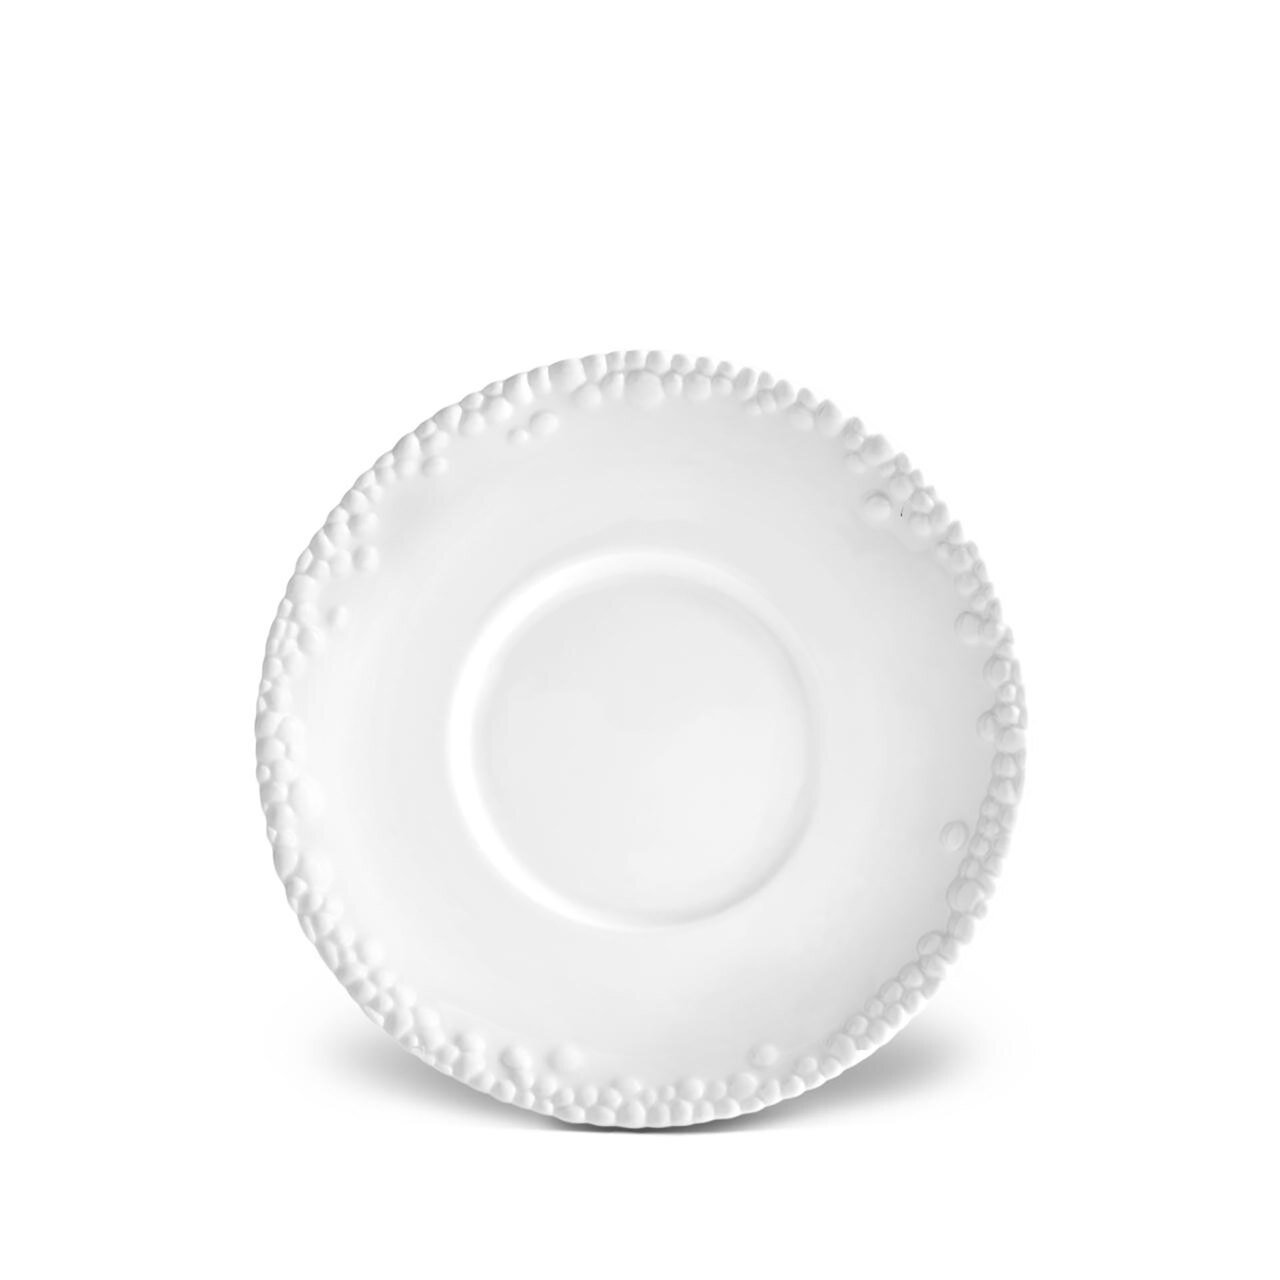 L'Objet Haas Mojave Saucer White HB160